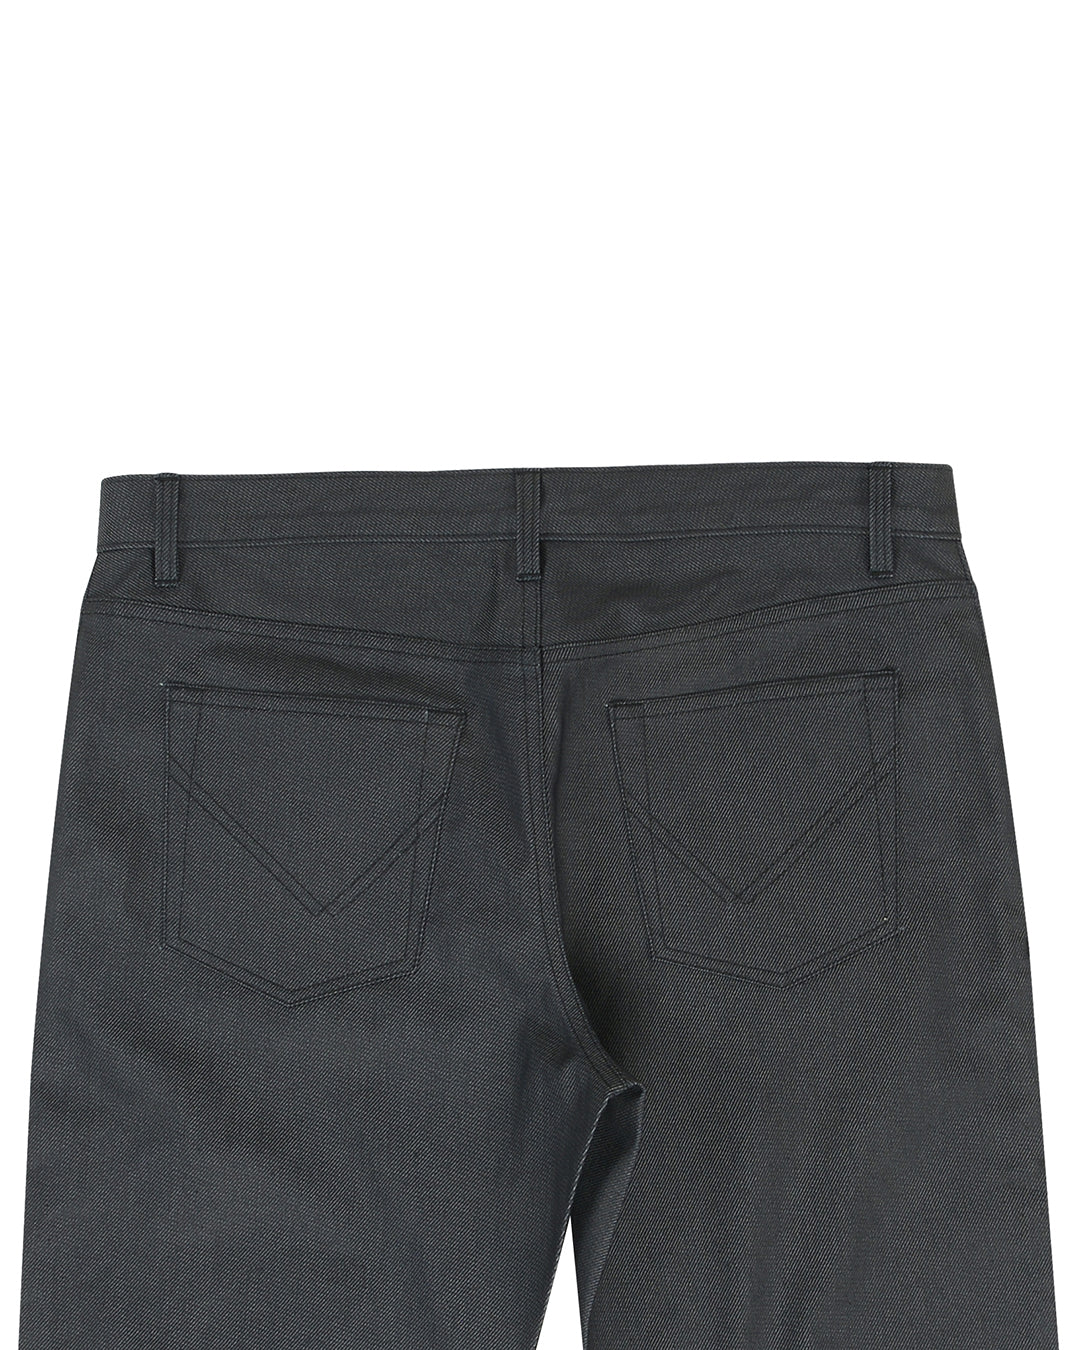 Waxed Jeans Charcoal Grey